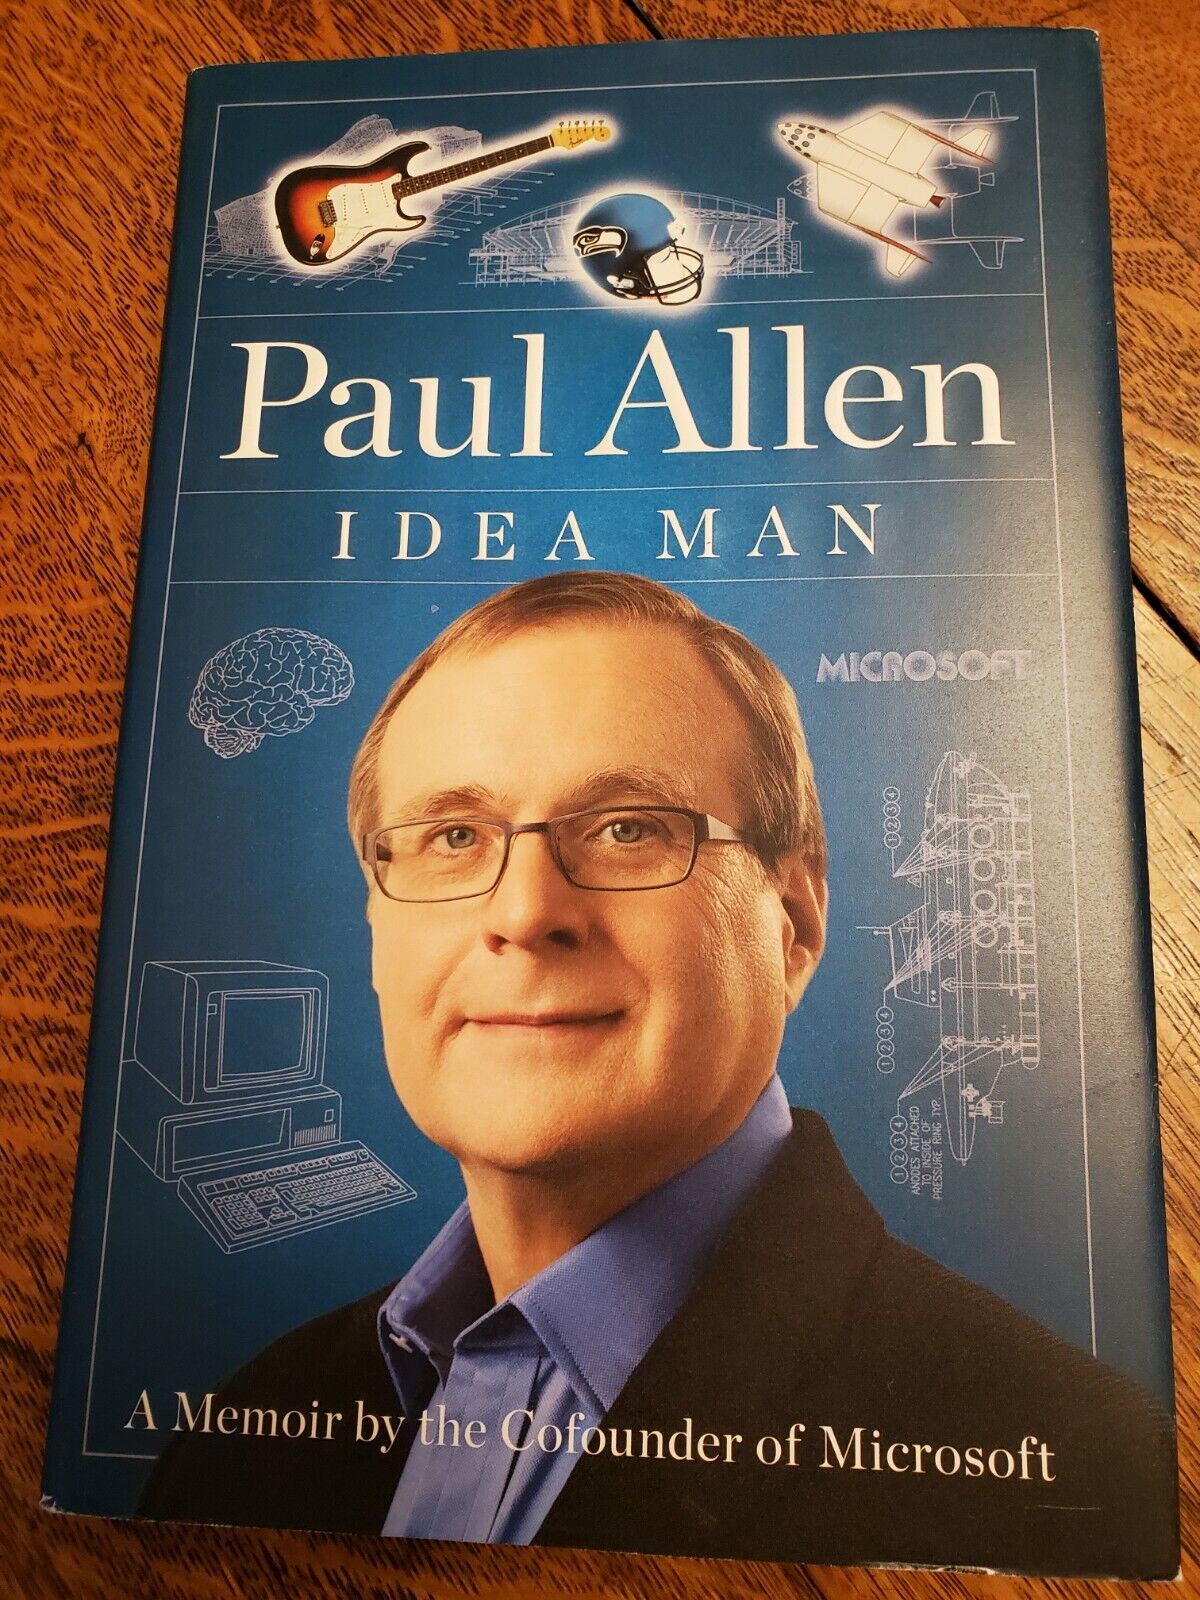 IDEA MAN BY PAUL ALLEN, SIGNED BOOK 1st EDITION Printing Autographed MICROSOFT